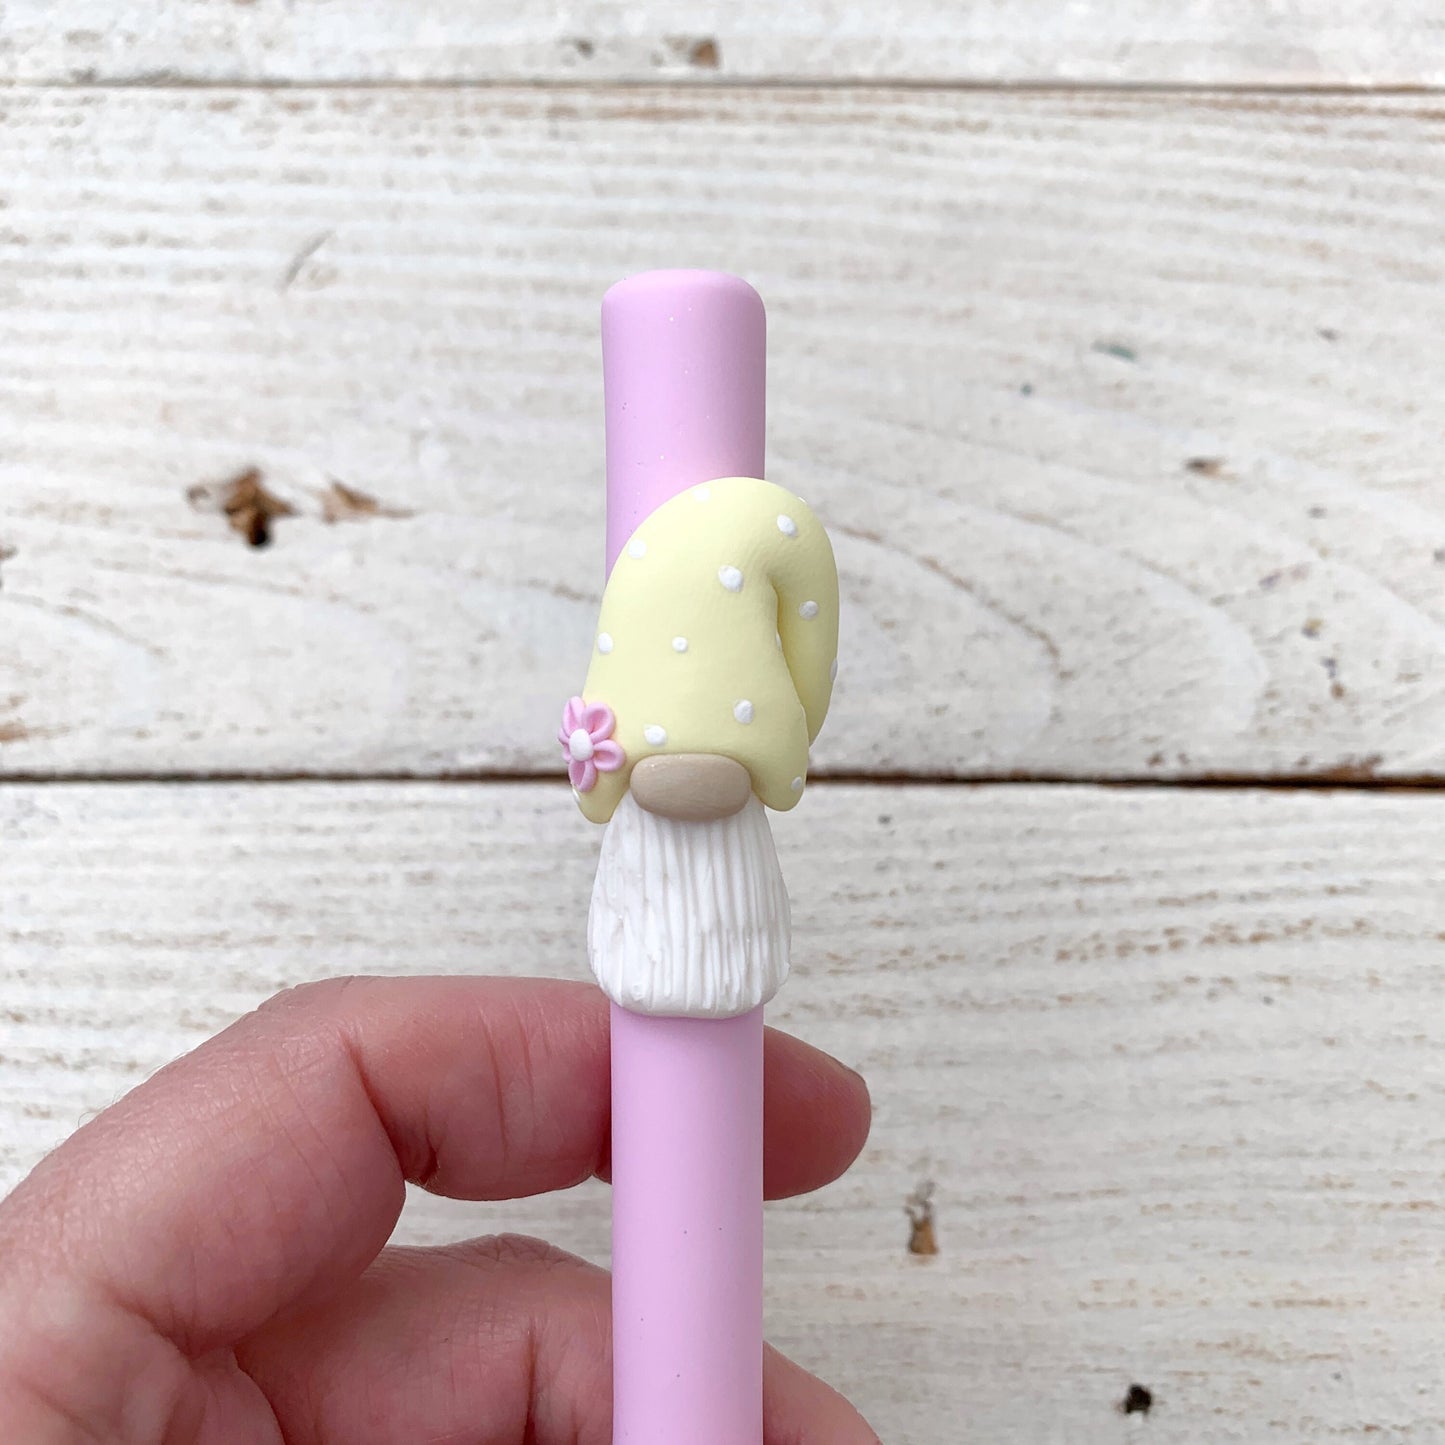 Spring Tomte gnome crochet hook, polymer clay pastel crochet hooks, gonk crochet hooks, yarn accessories, Easter gnomes